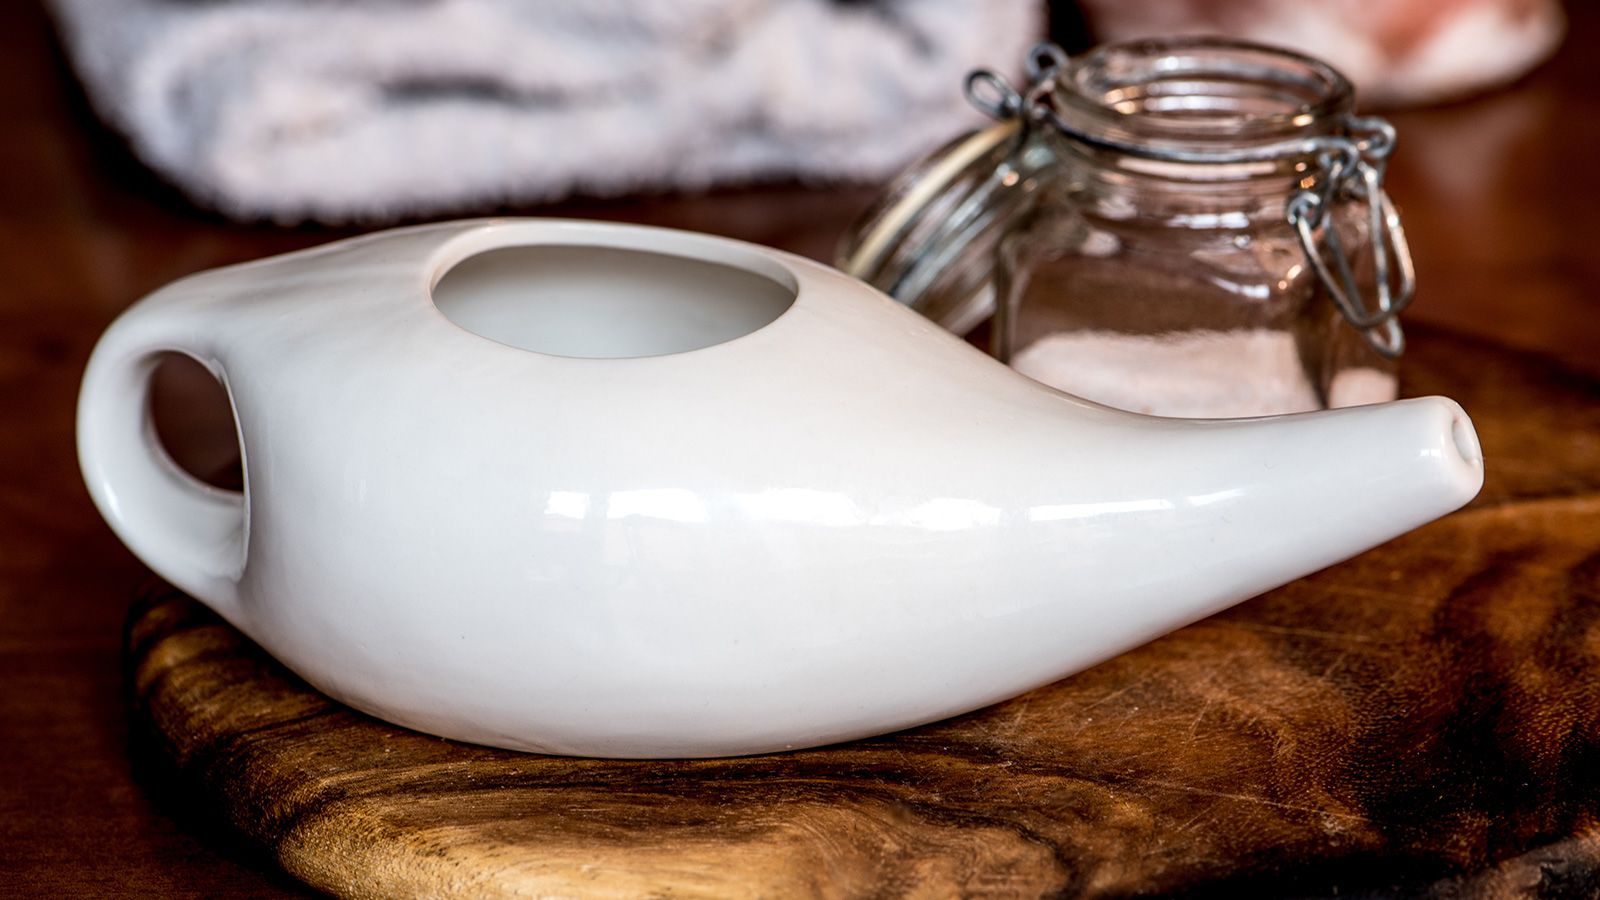 Do Neti Pots Work? How to Use Neti Pots Safely for Nasal Irrigation